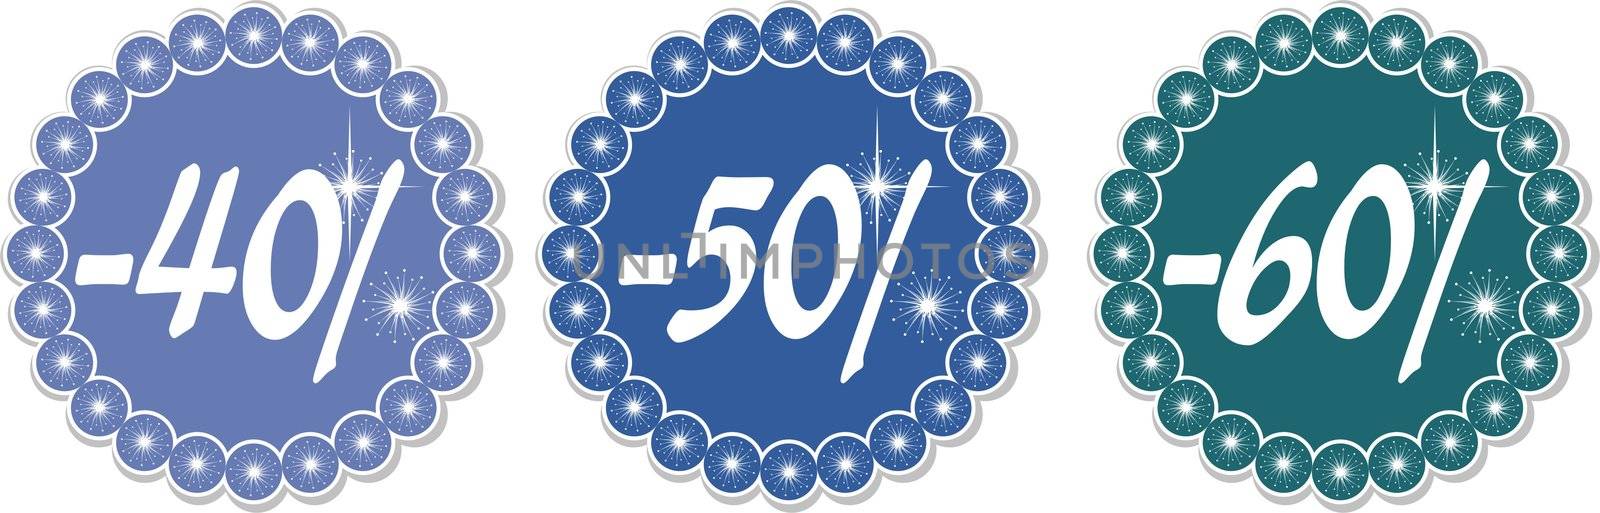 40-60% price tags of snowflakes, vector illustration